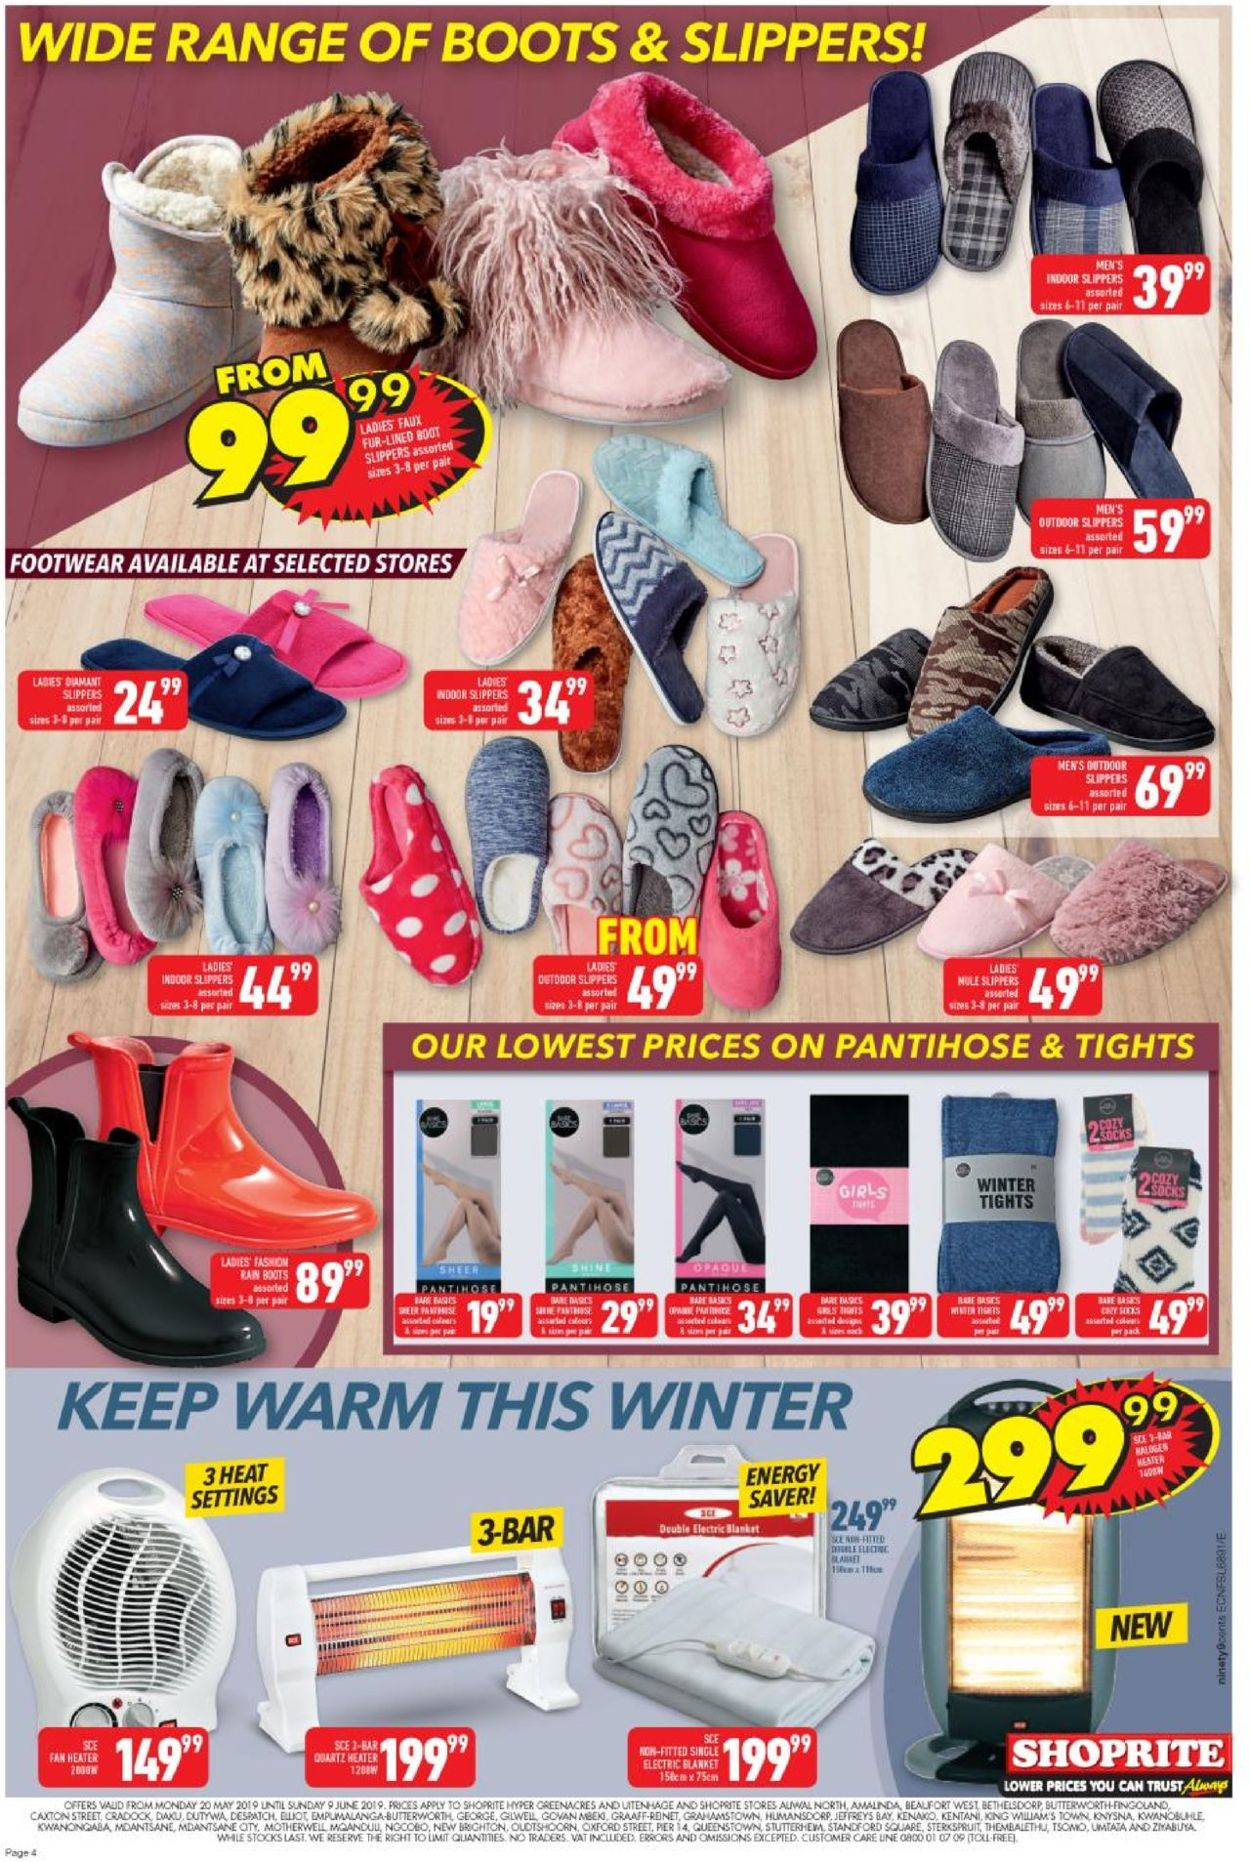 Shoprite Current Catalogue 20190520 20190609 3 Za intended for dimensions 1250 X 1862